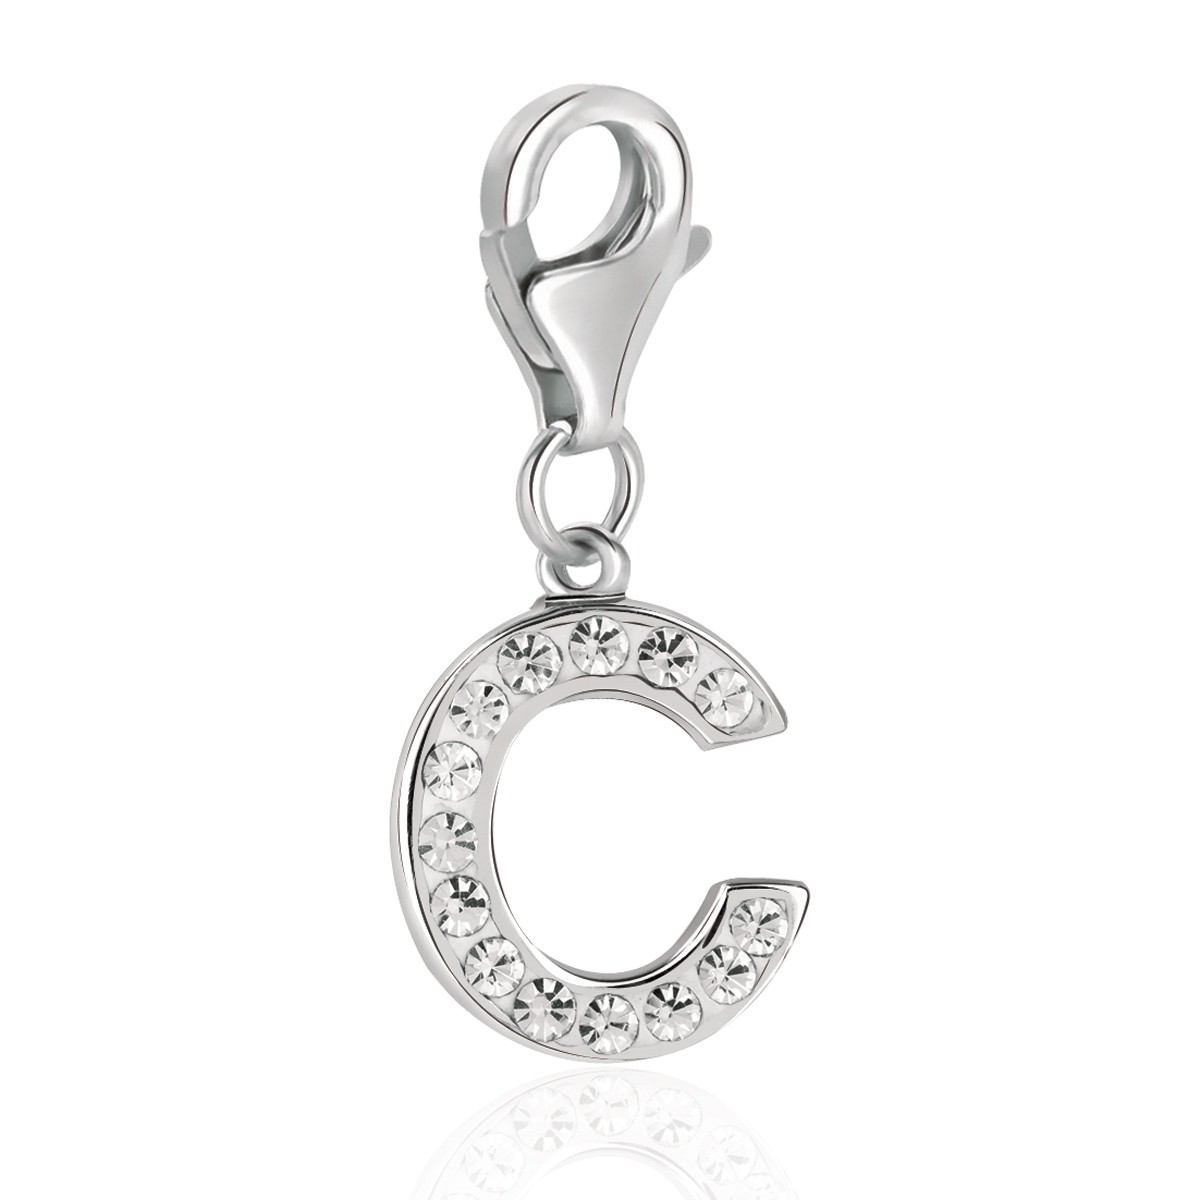 Letter C Charm with White Tone Crystal Accents in Sterling Silver ...